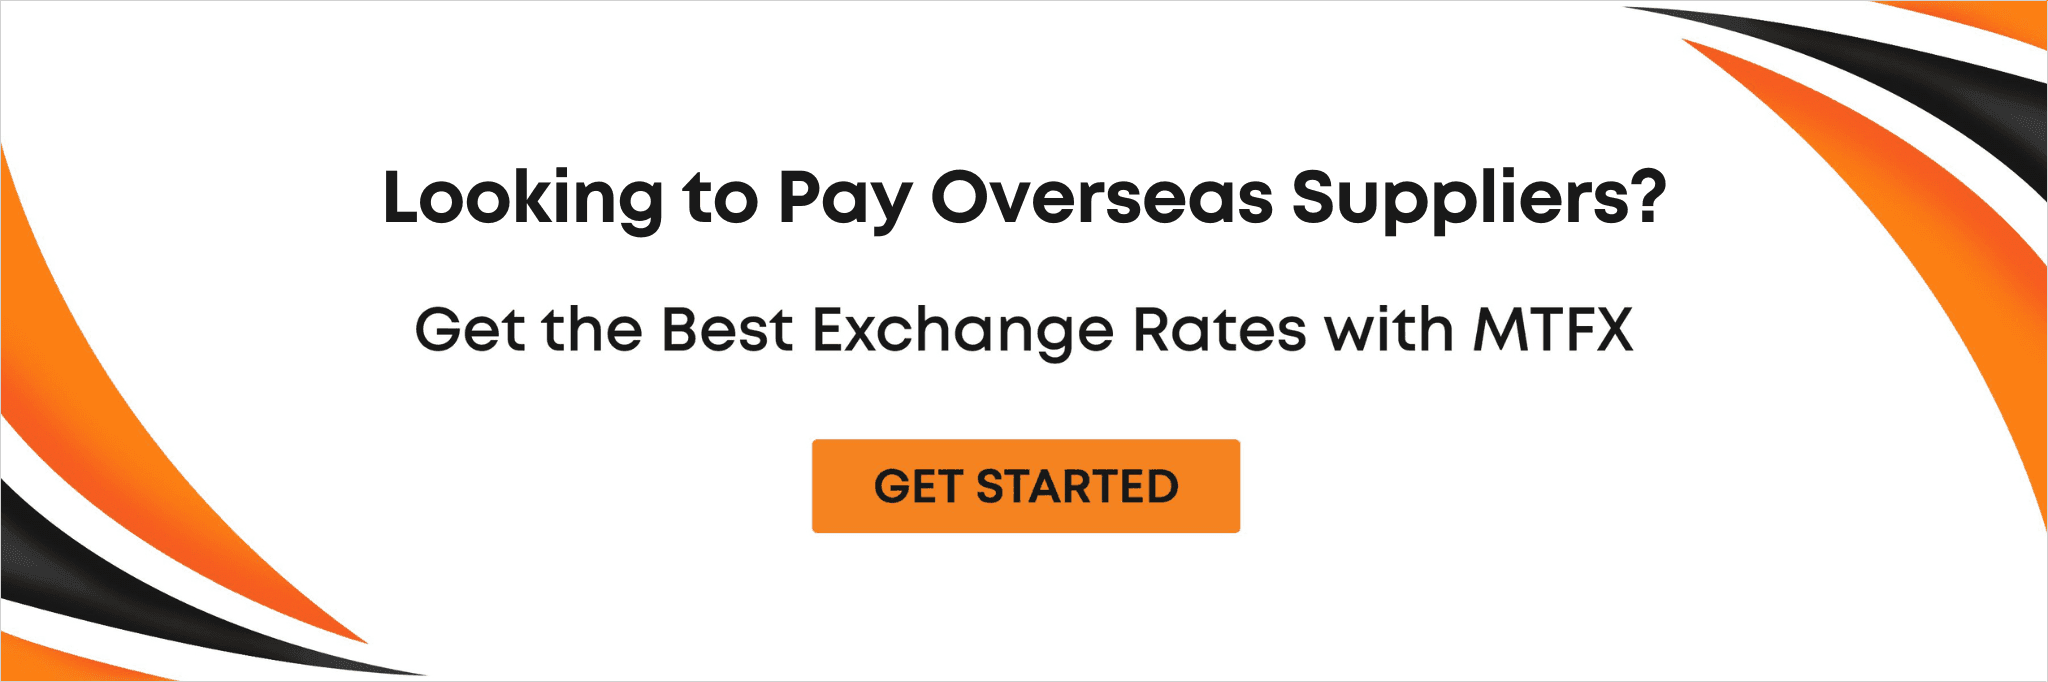 Looking to Pay Overseas Suppliers?